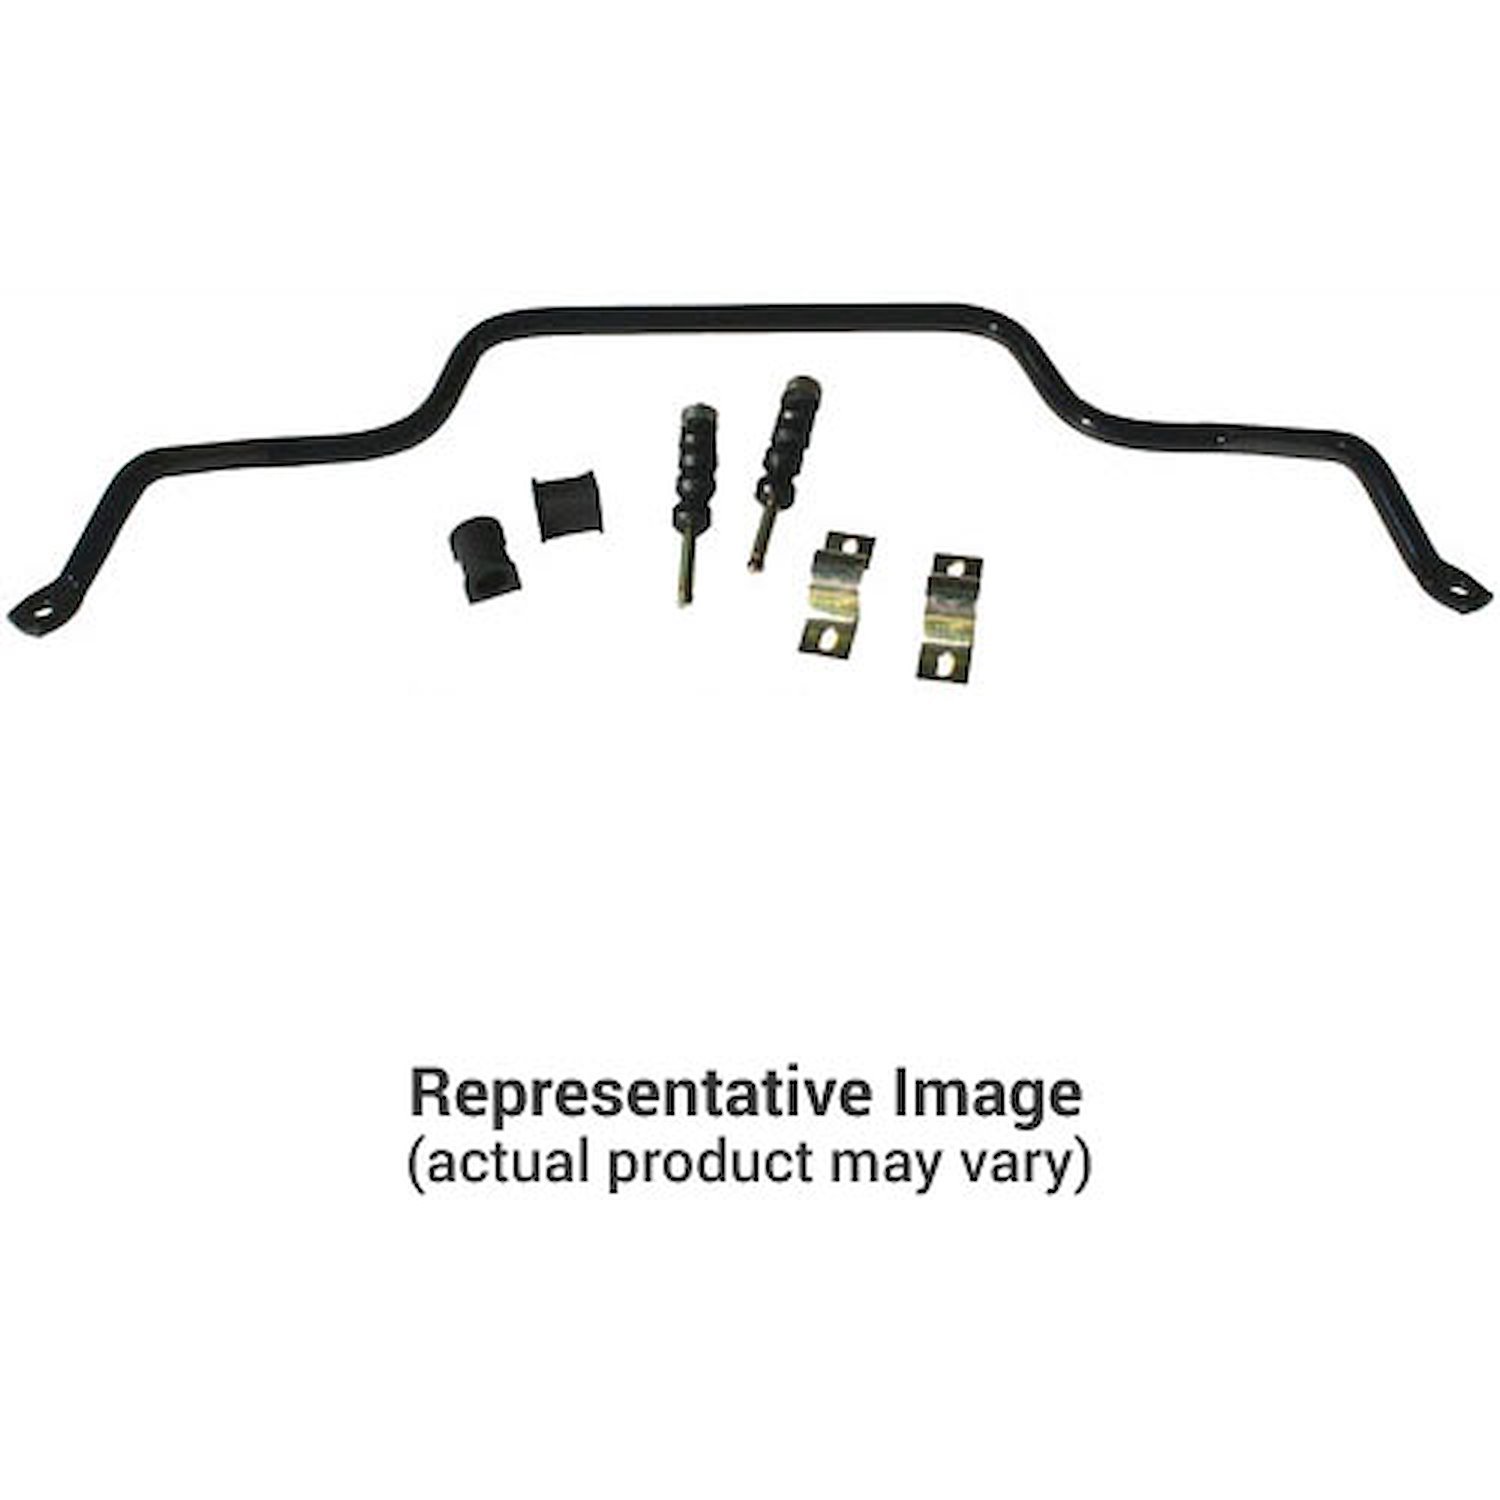 1-1/8" Front Sway Bar 1984-90 GM Celebrity and Citation